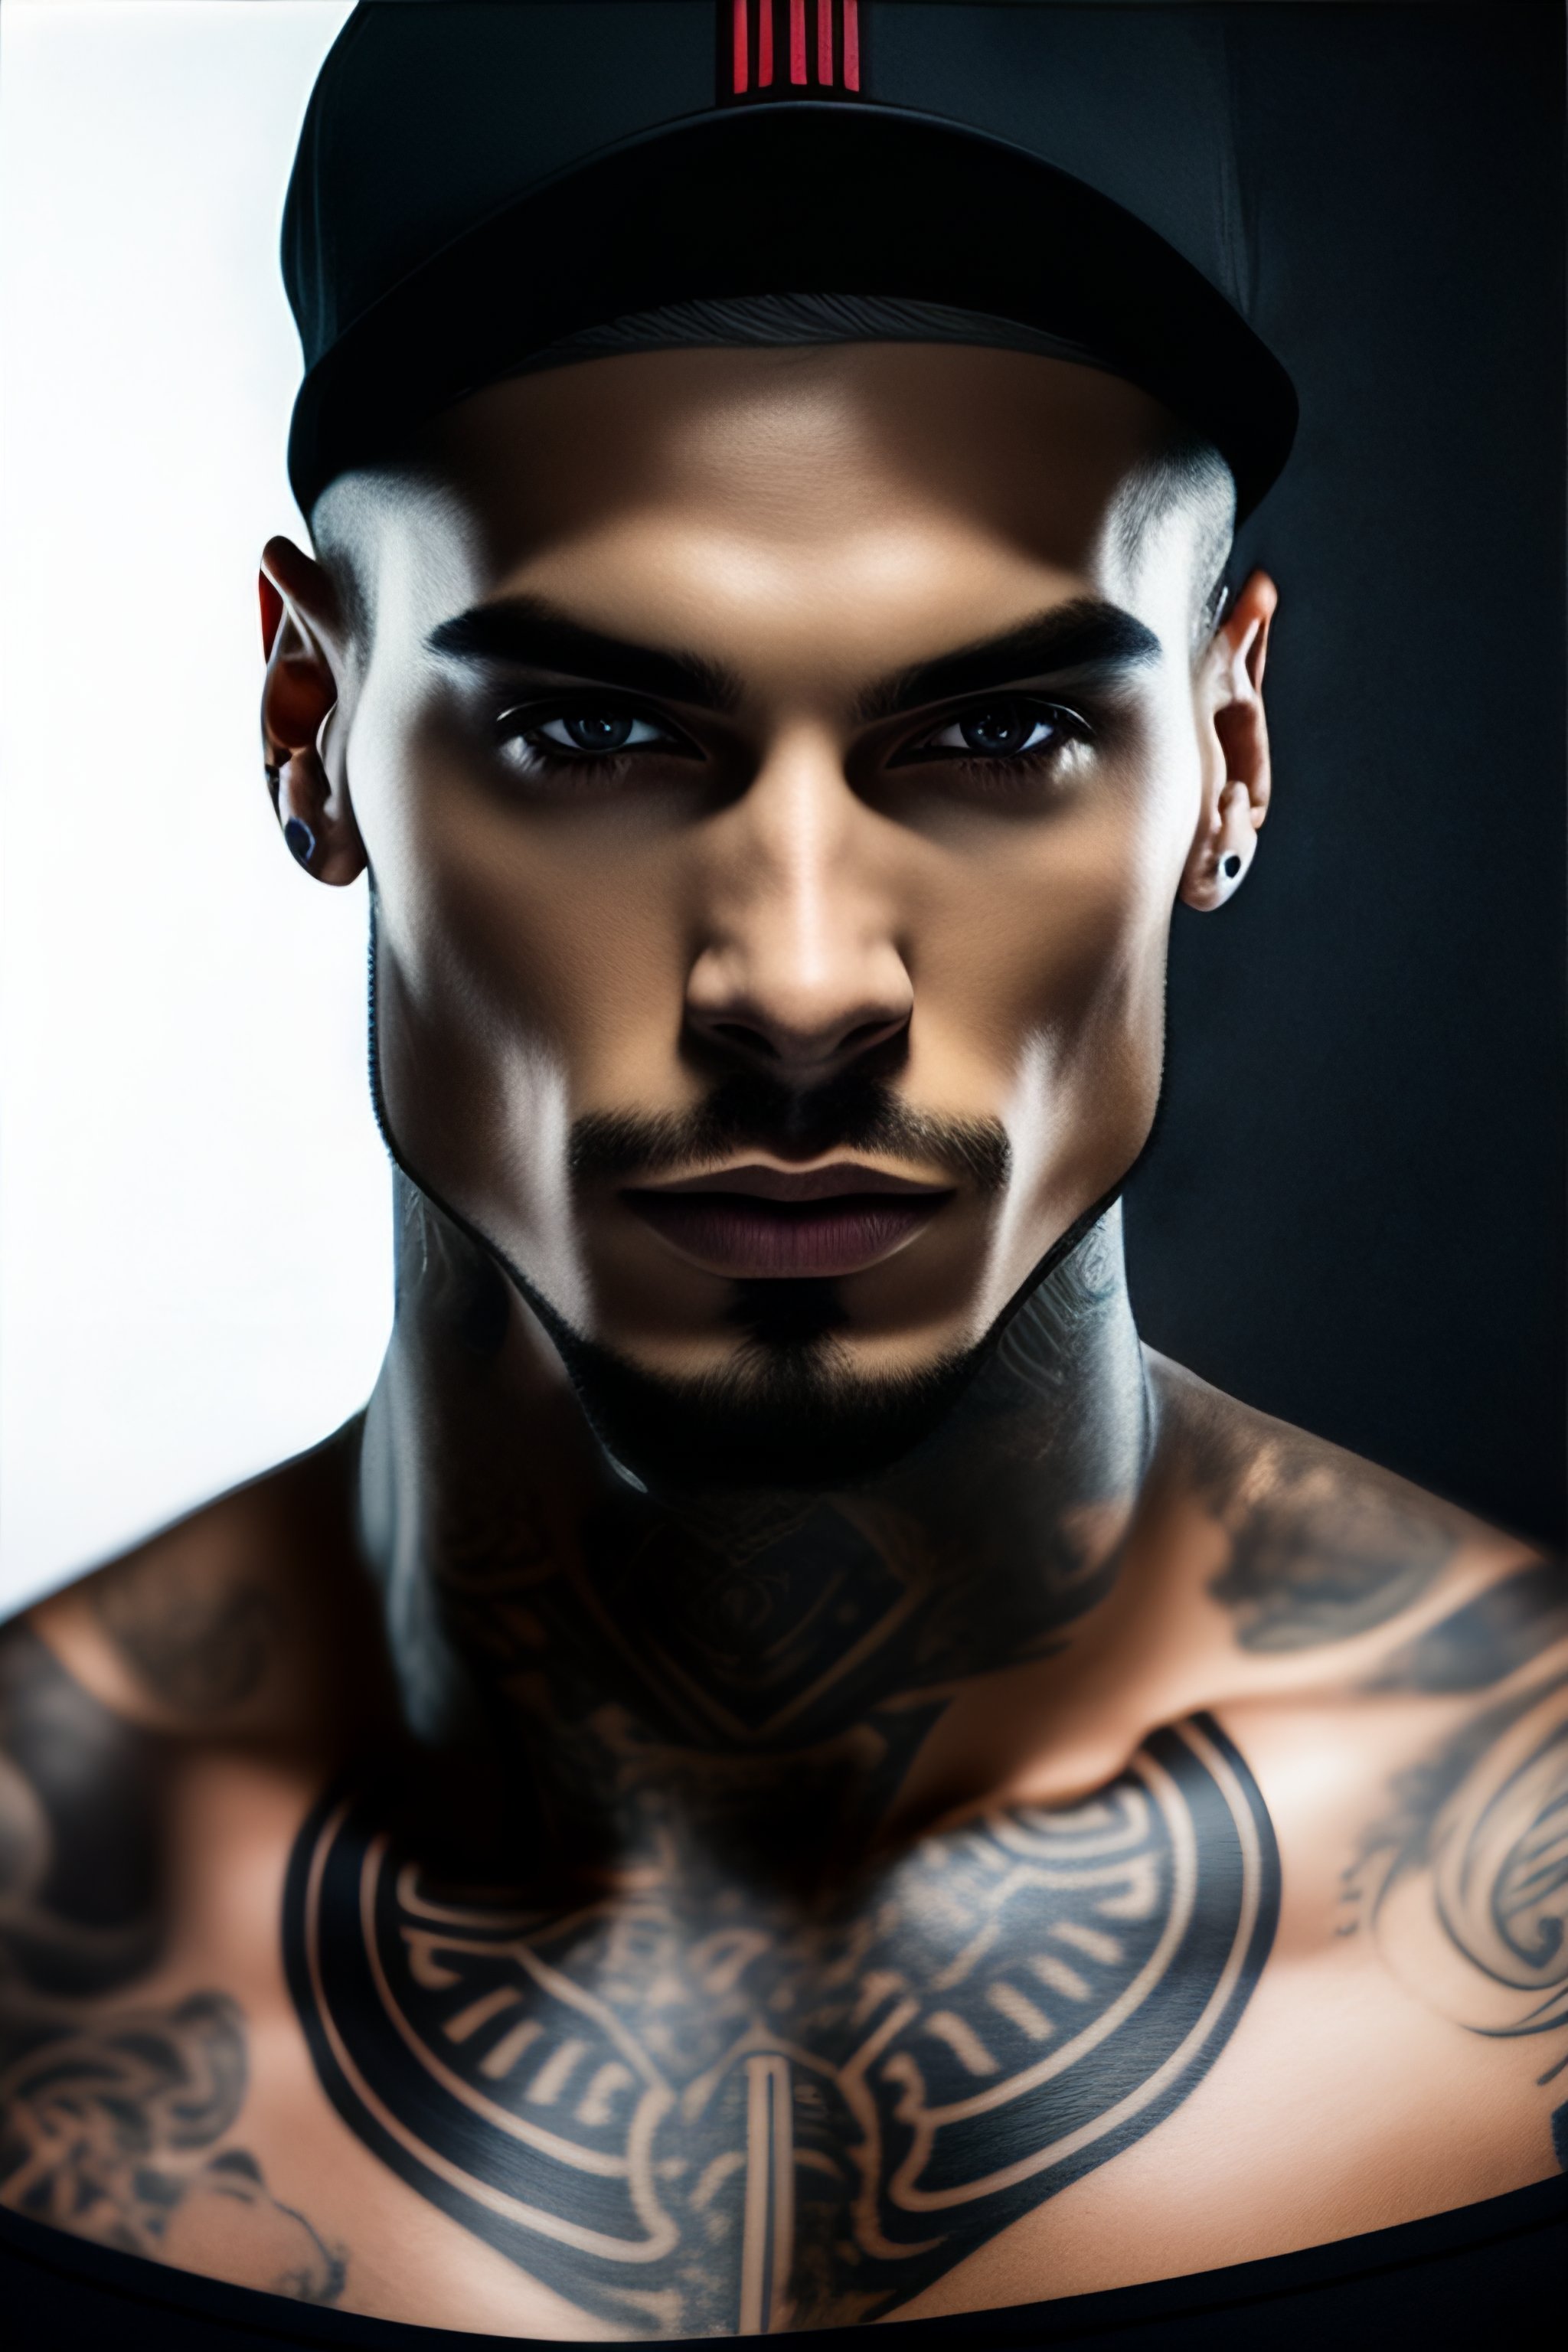 Lexica - Techno dj, with a lot of tattoos in his arms, skinny guy, with black cap, press photo